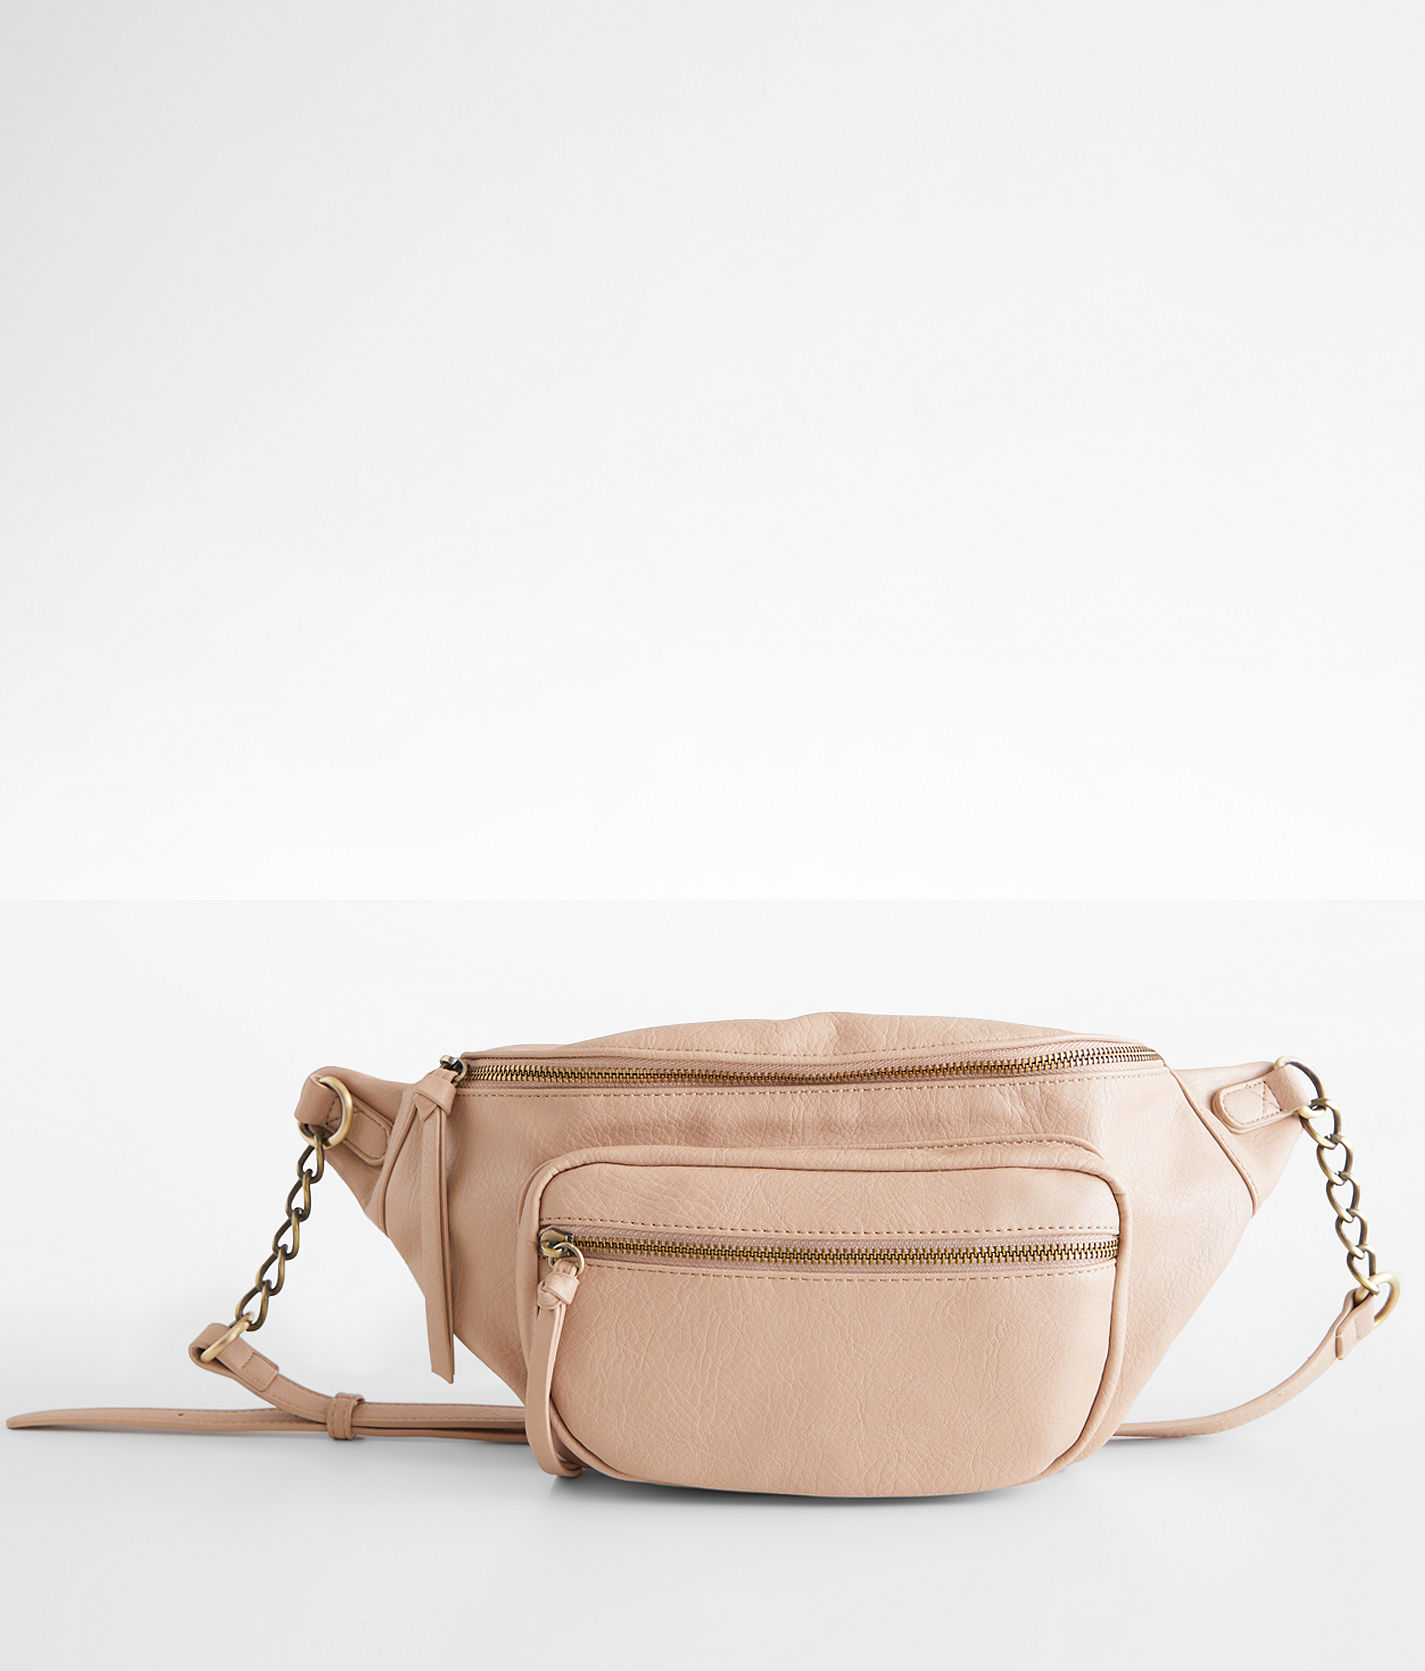 Moda Luxe Bag Multiple - $27 (55% Off Retail) - From Hailey